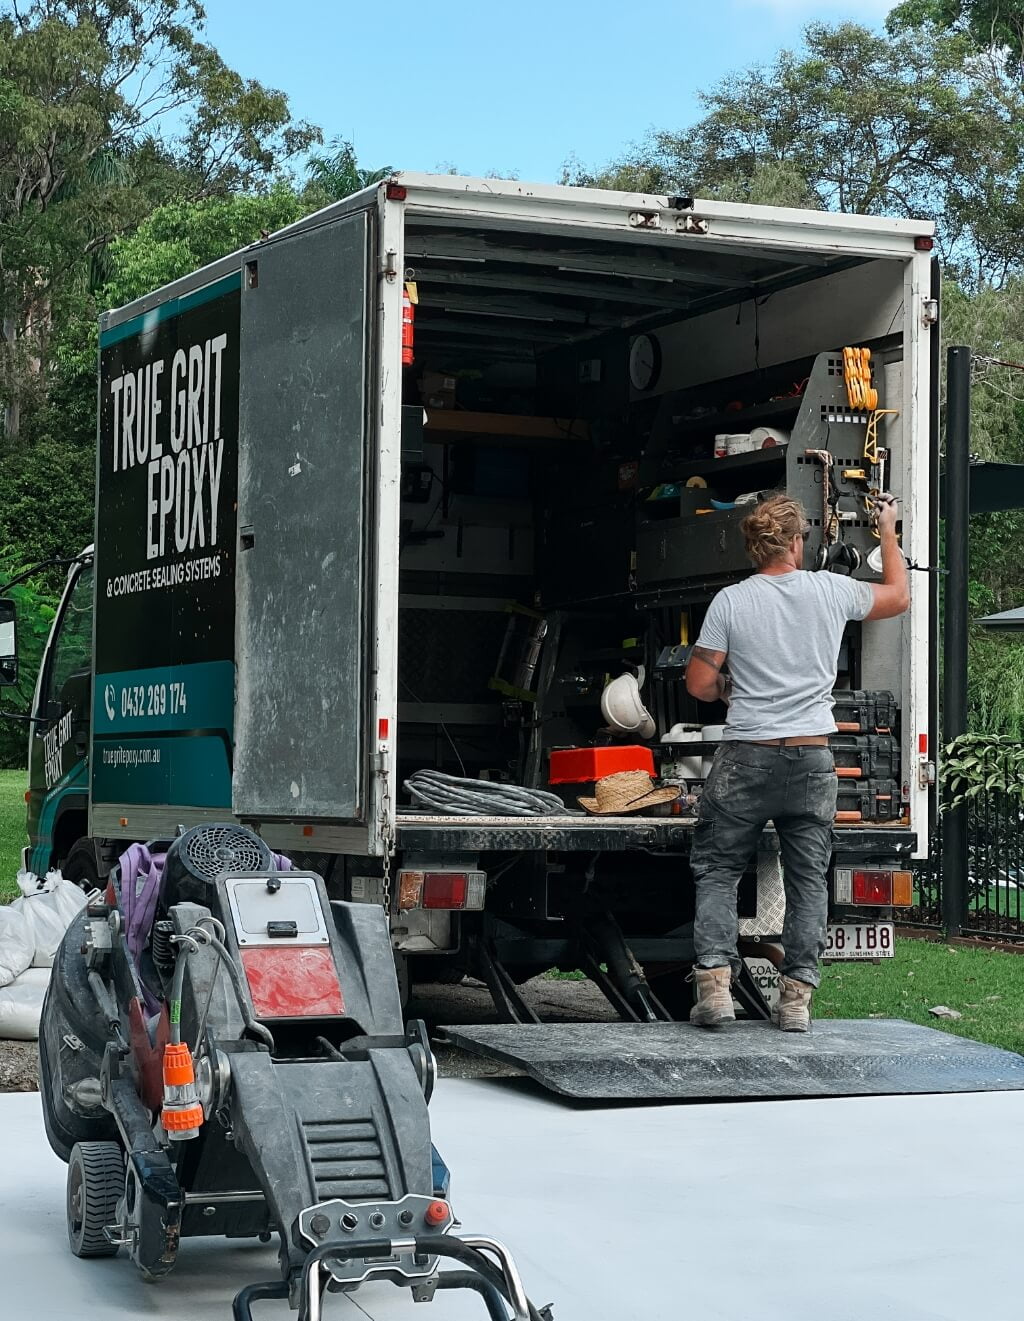 A man unloading a truck with epoxy flooring tools in it.